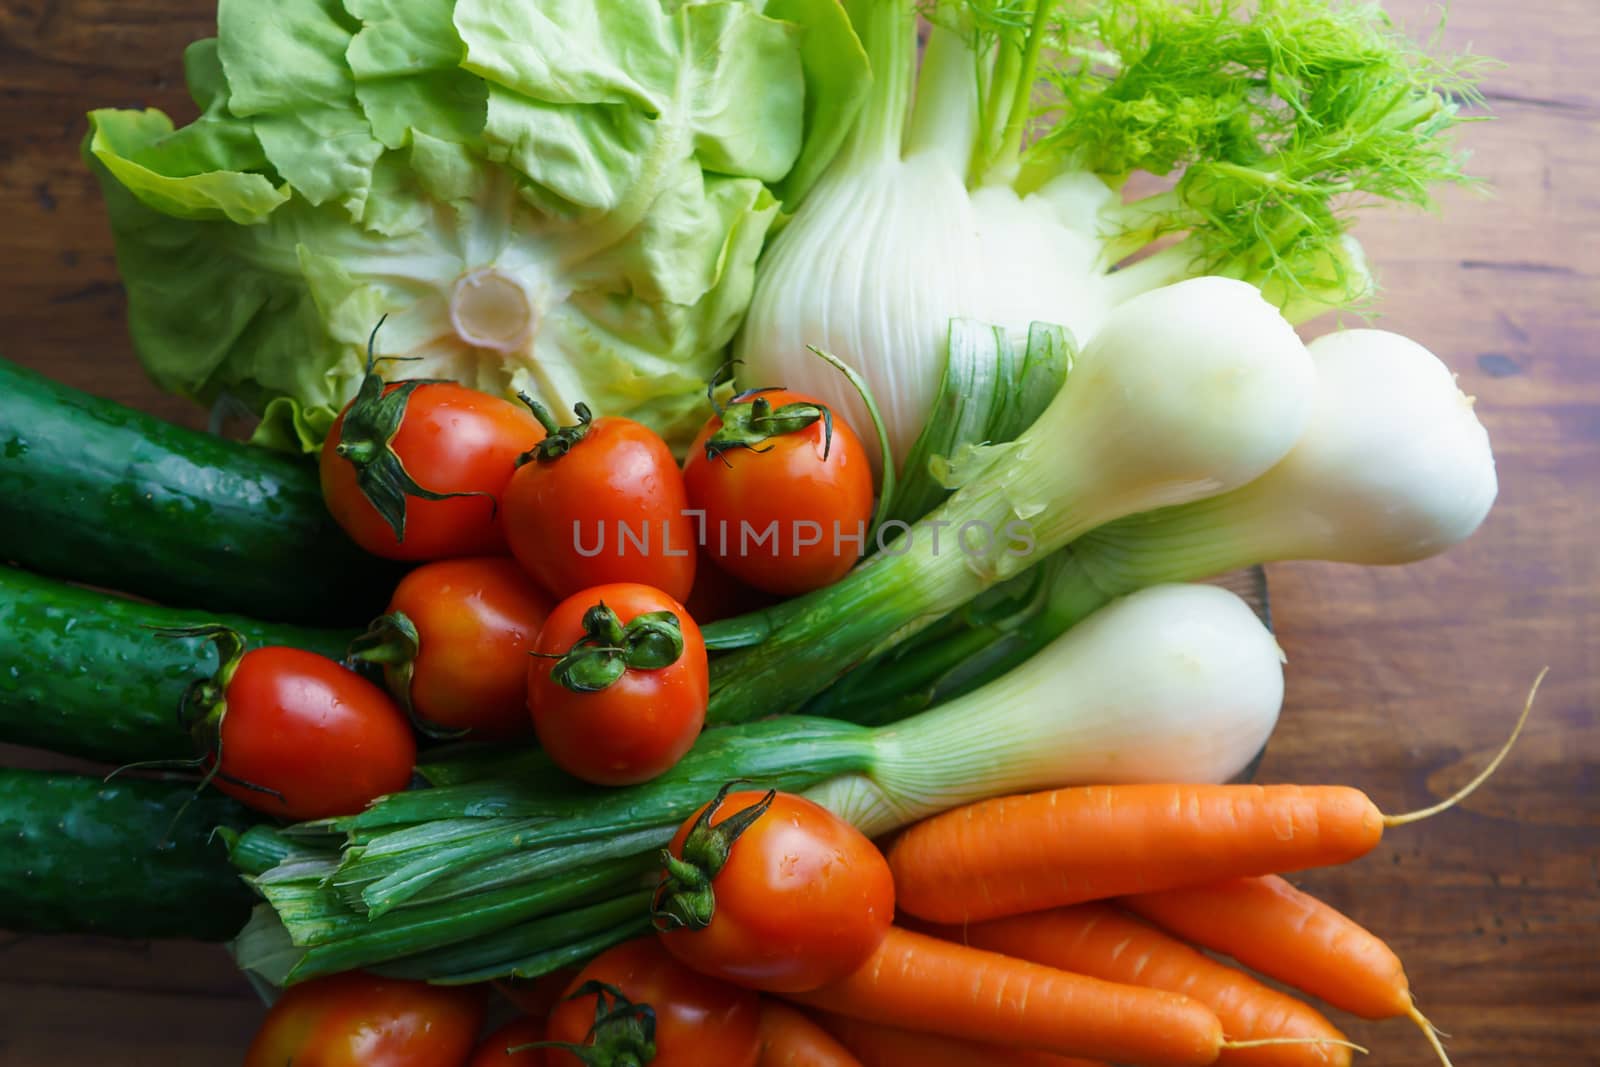 Healthy nutrition with fresh raw vegetables: flat lay top view of a group of salad ingredients, lettuce, tomatoes, cucumbers, fennel, spring onions, and carrots on a wooden table copy space by robbyfontanesi